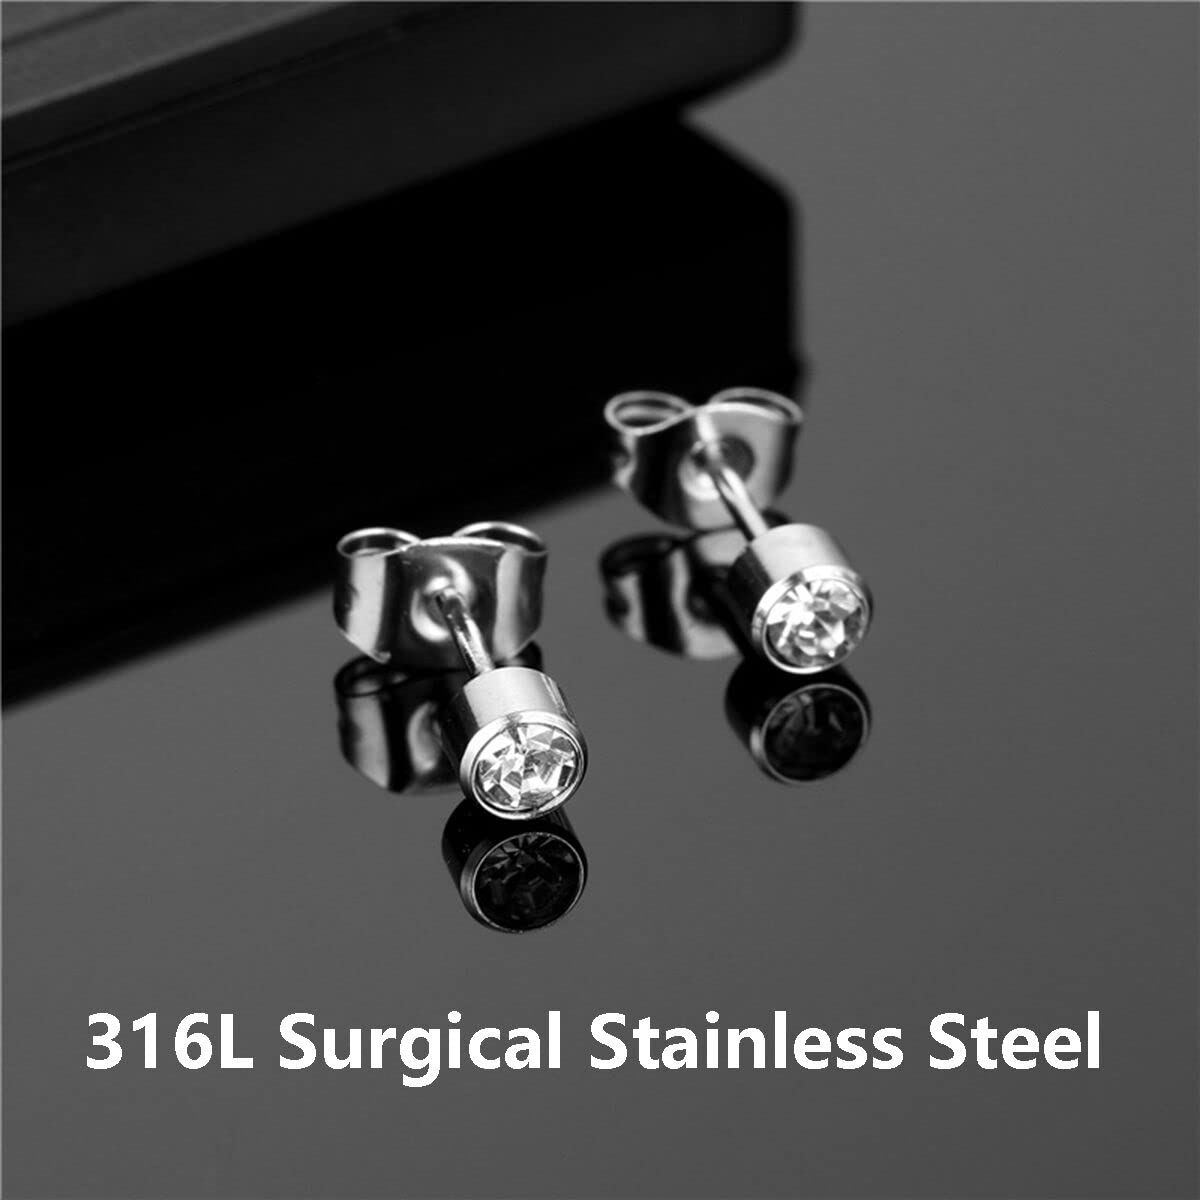 Professional Ear Piercing Gun Kit with 20 Pairs 316L Surgical Stainless Steel Gun Stud Earrings for Body Nose Lip Salon Home Use